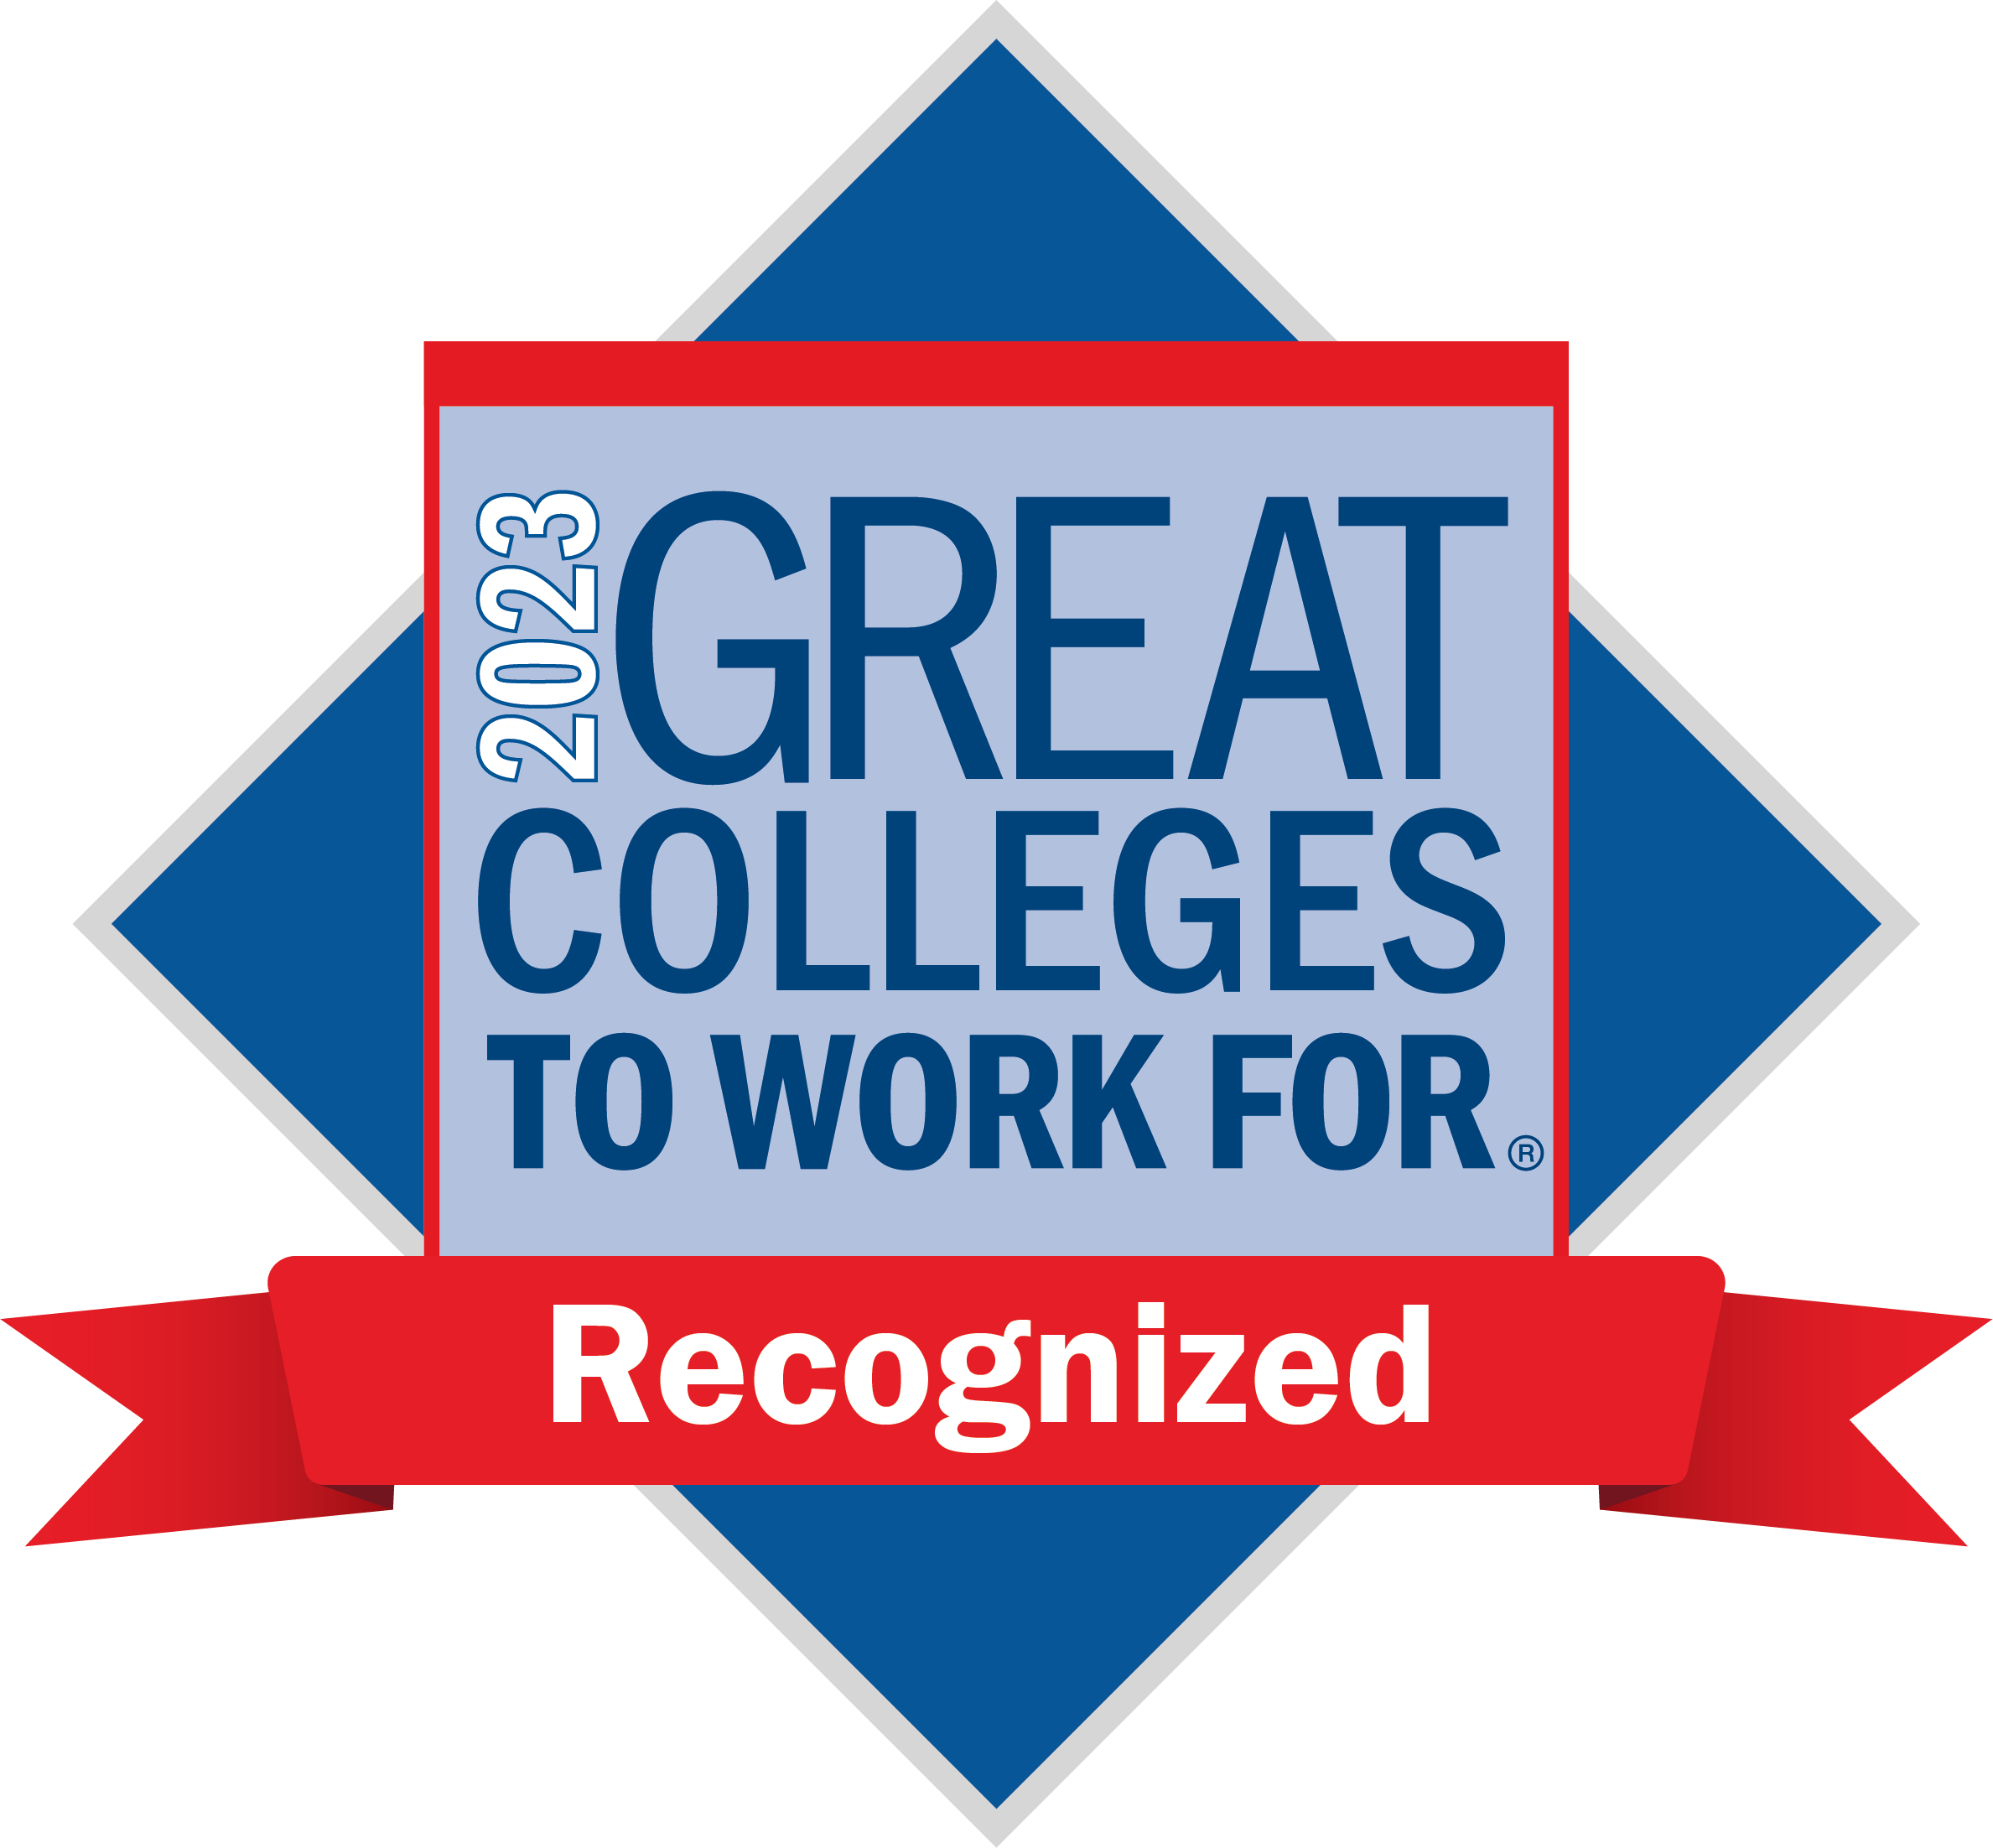 WNC is among 72 colleges and universities to receive Great Colleges to Work For recognition.